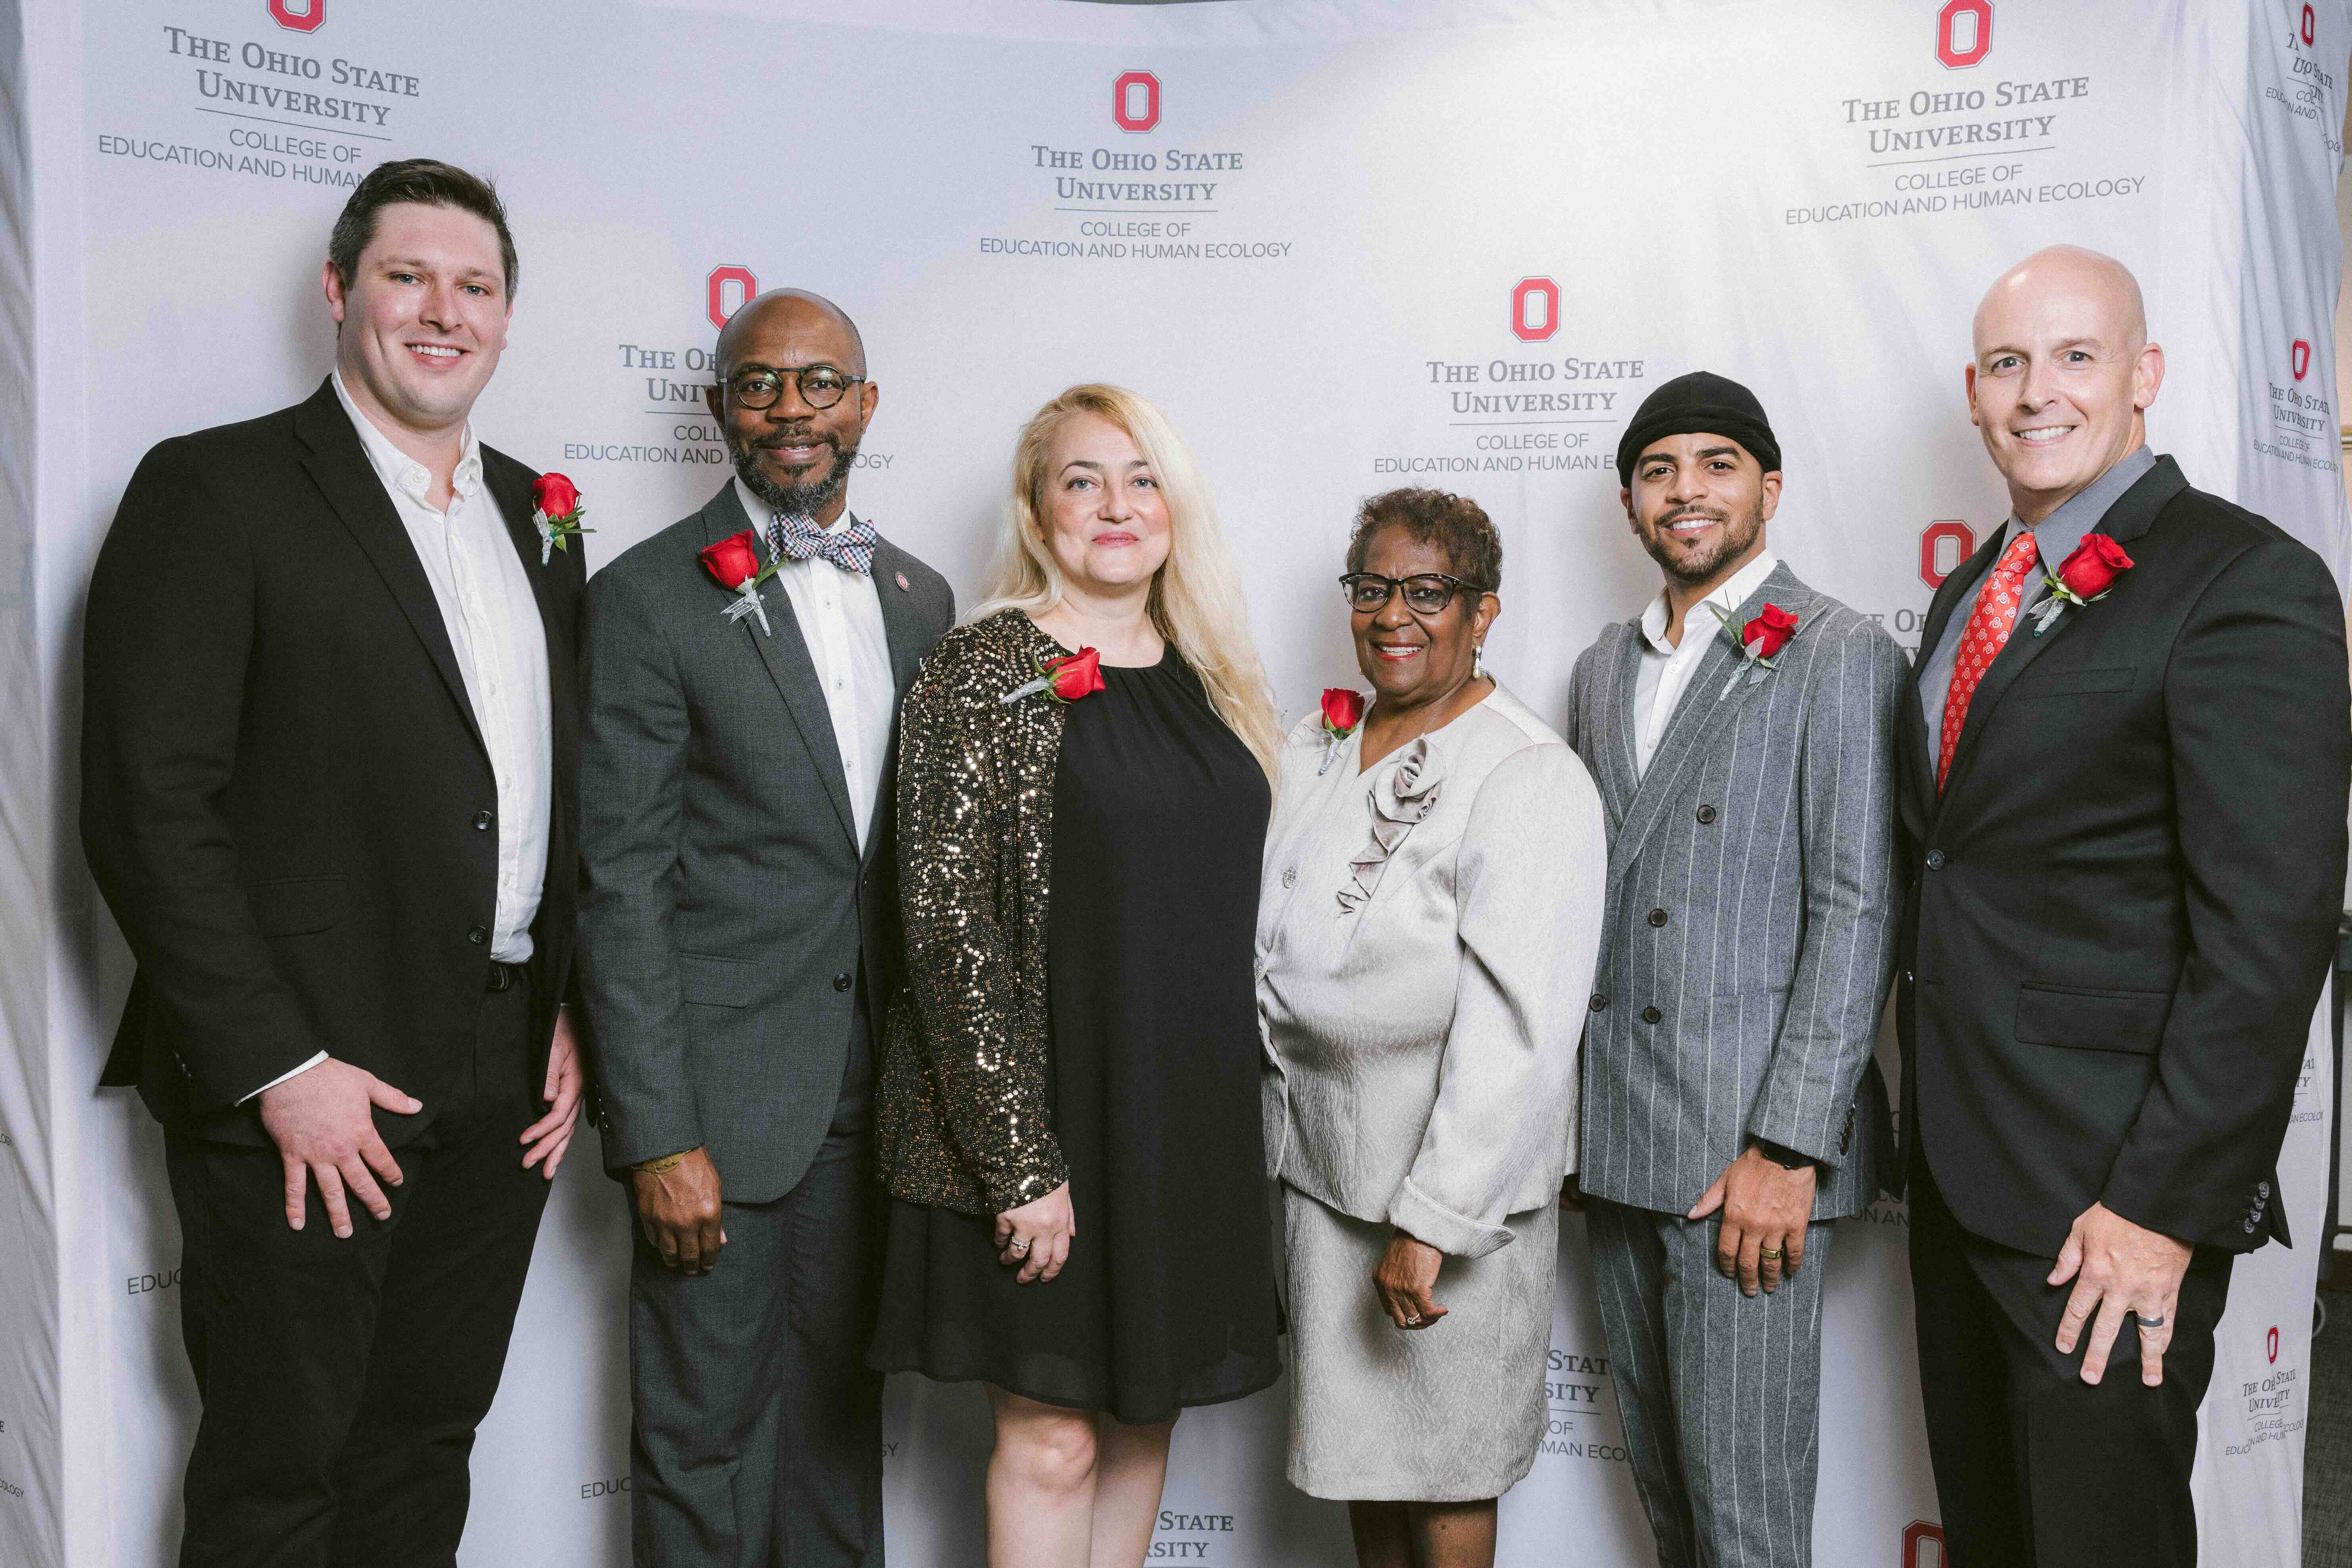 Ohio State alumni posing in front of backdrop at a homecoming event